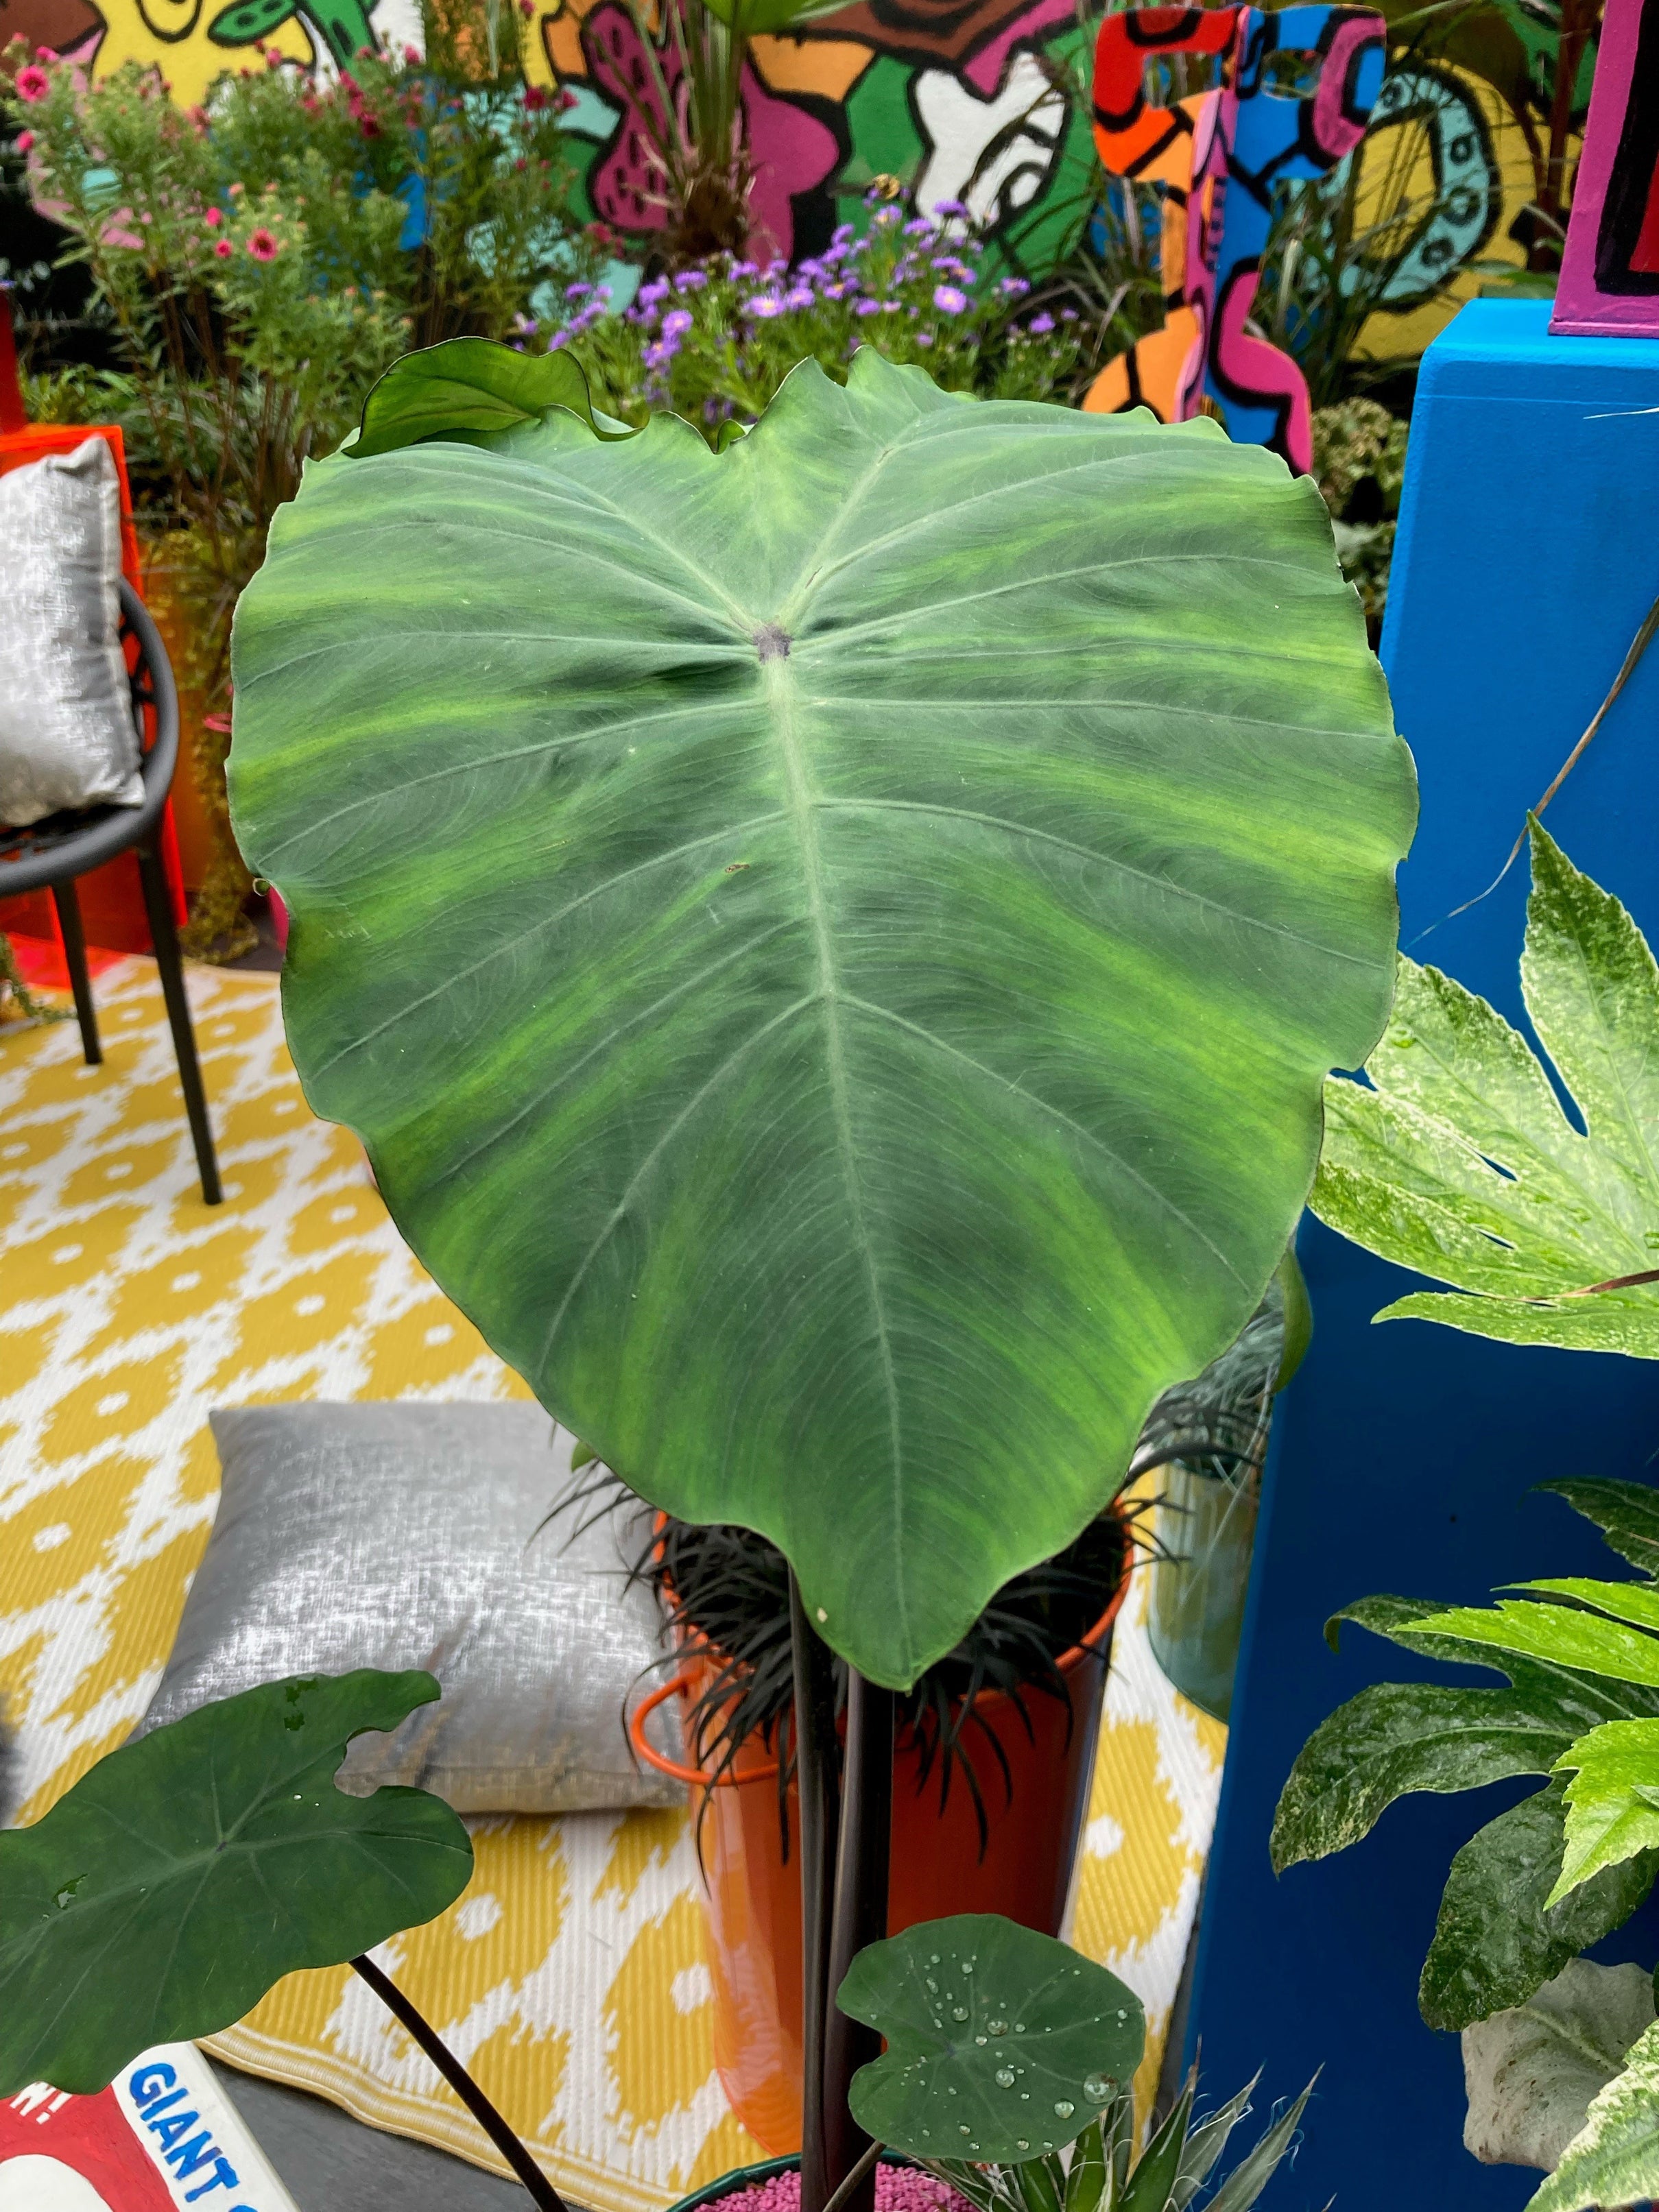 Tropical-looking alocasia in a pop art setting (Hannah Stephenson/PA)